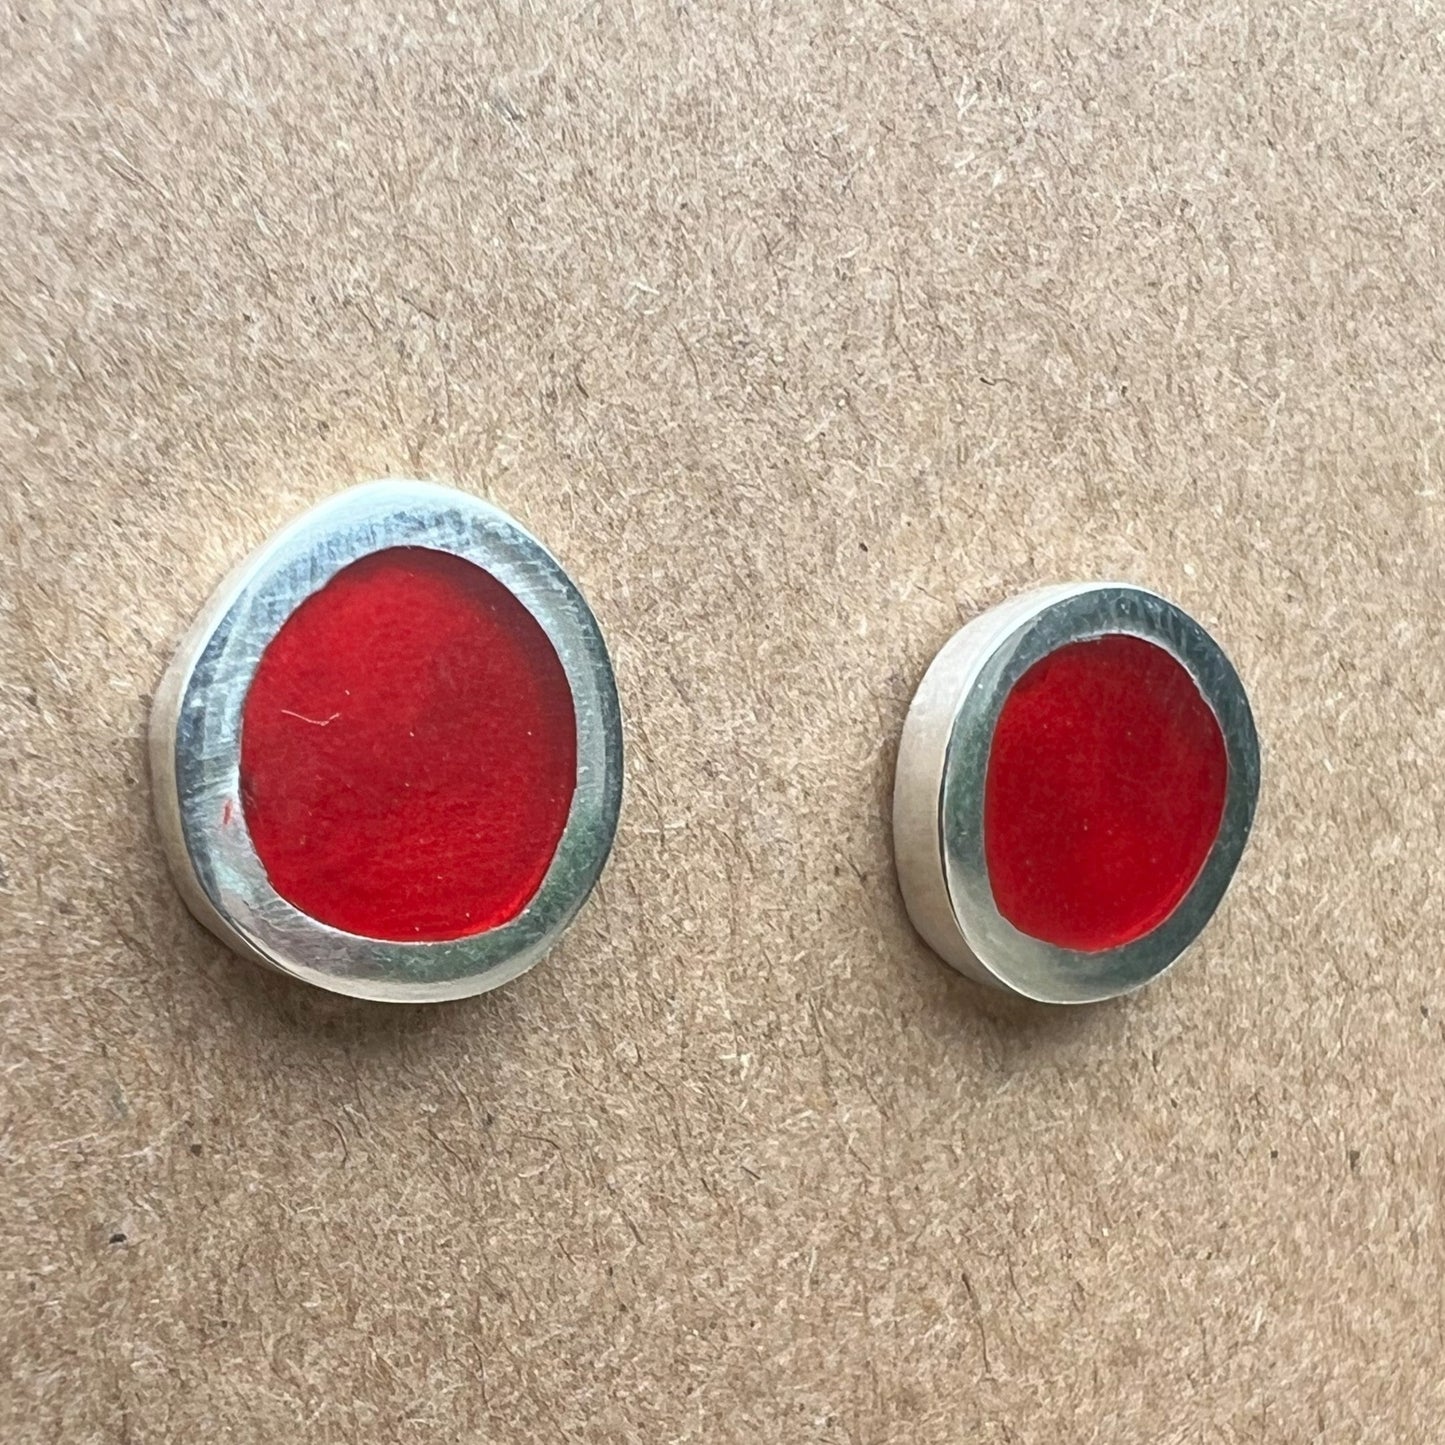 Translucent Red Resin and Silver Stud Earrings